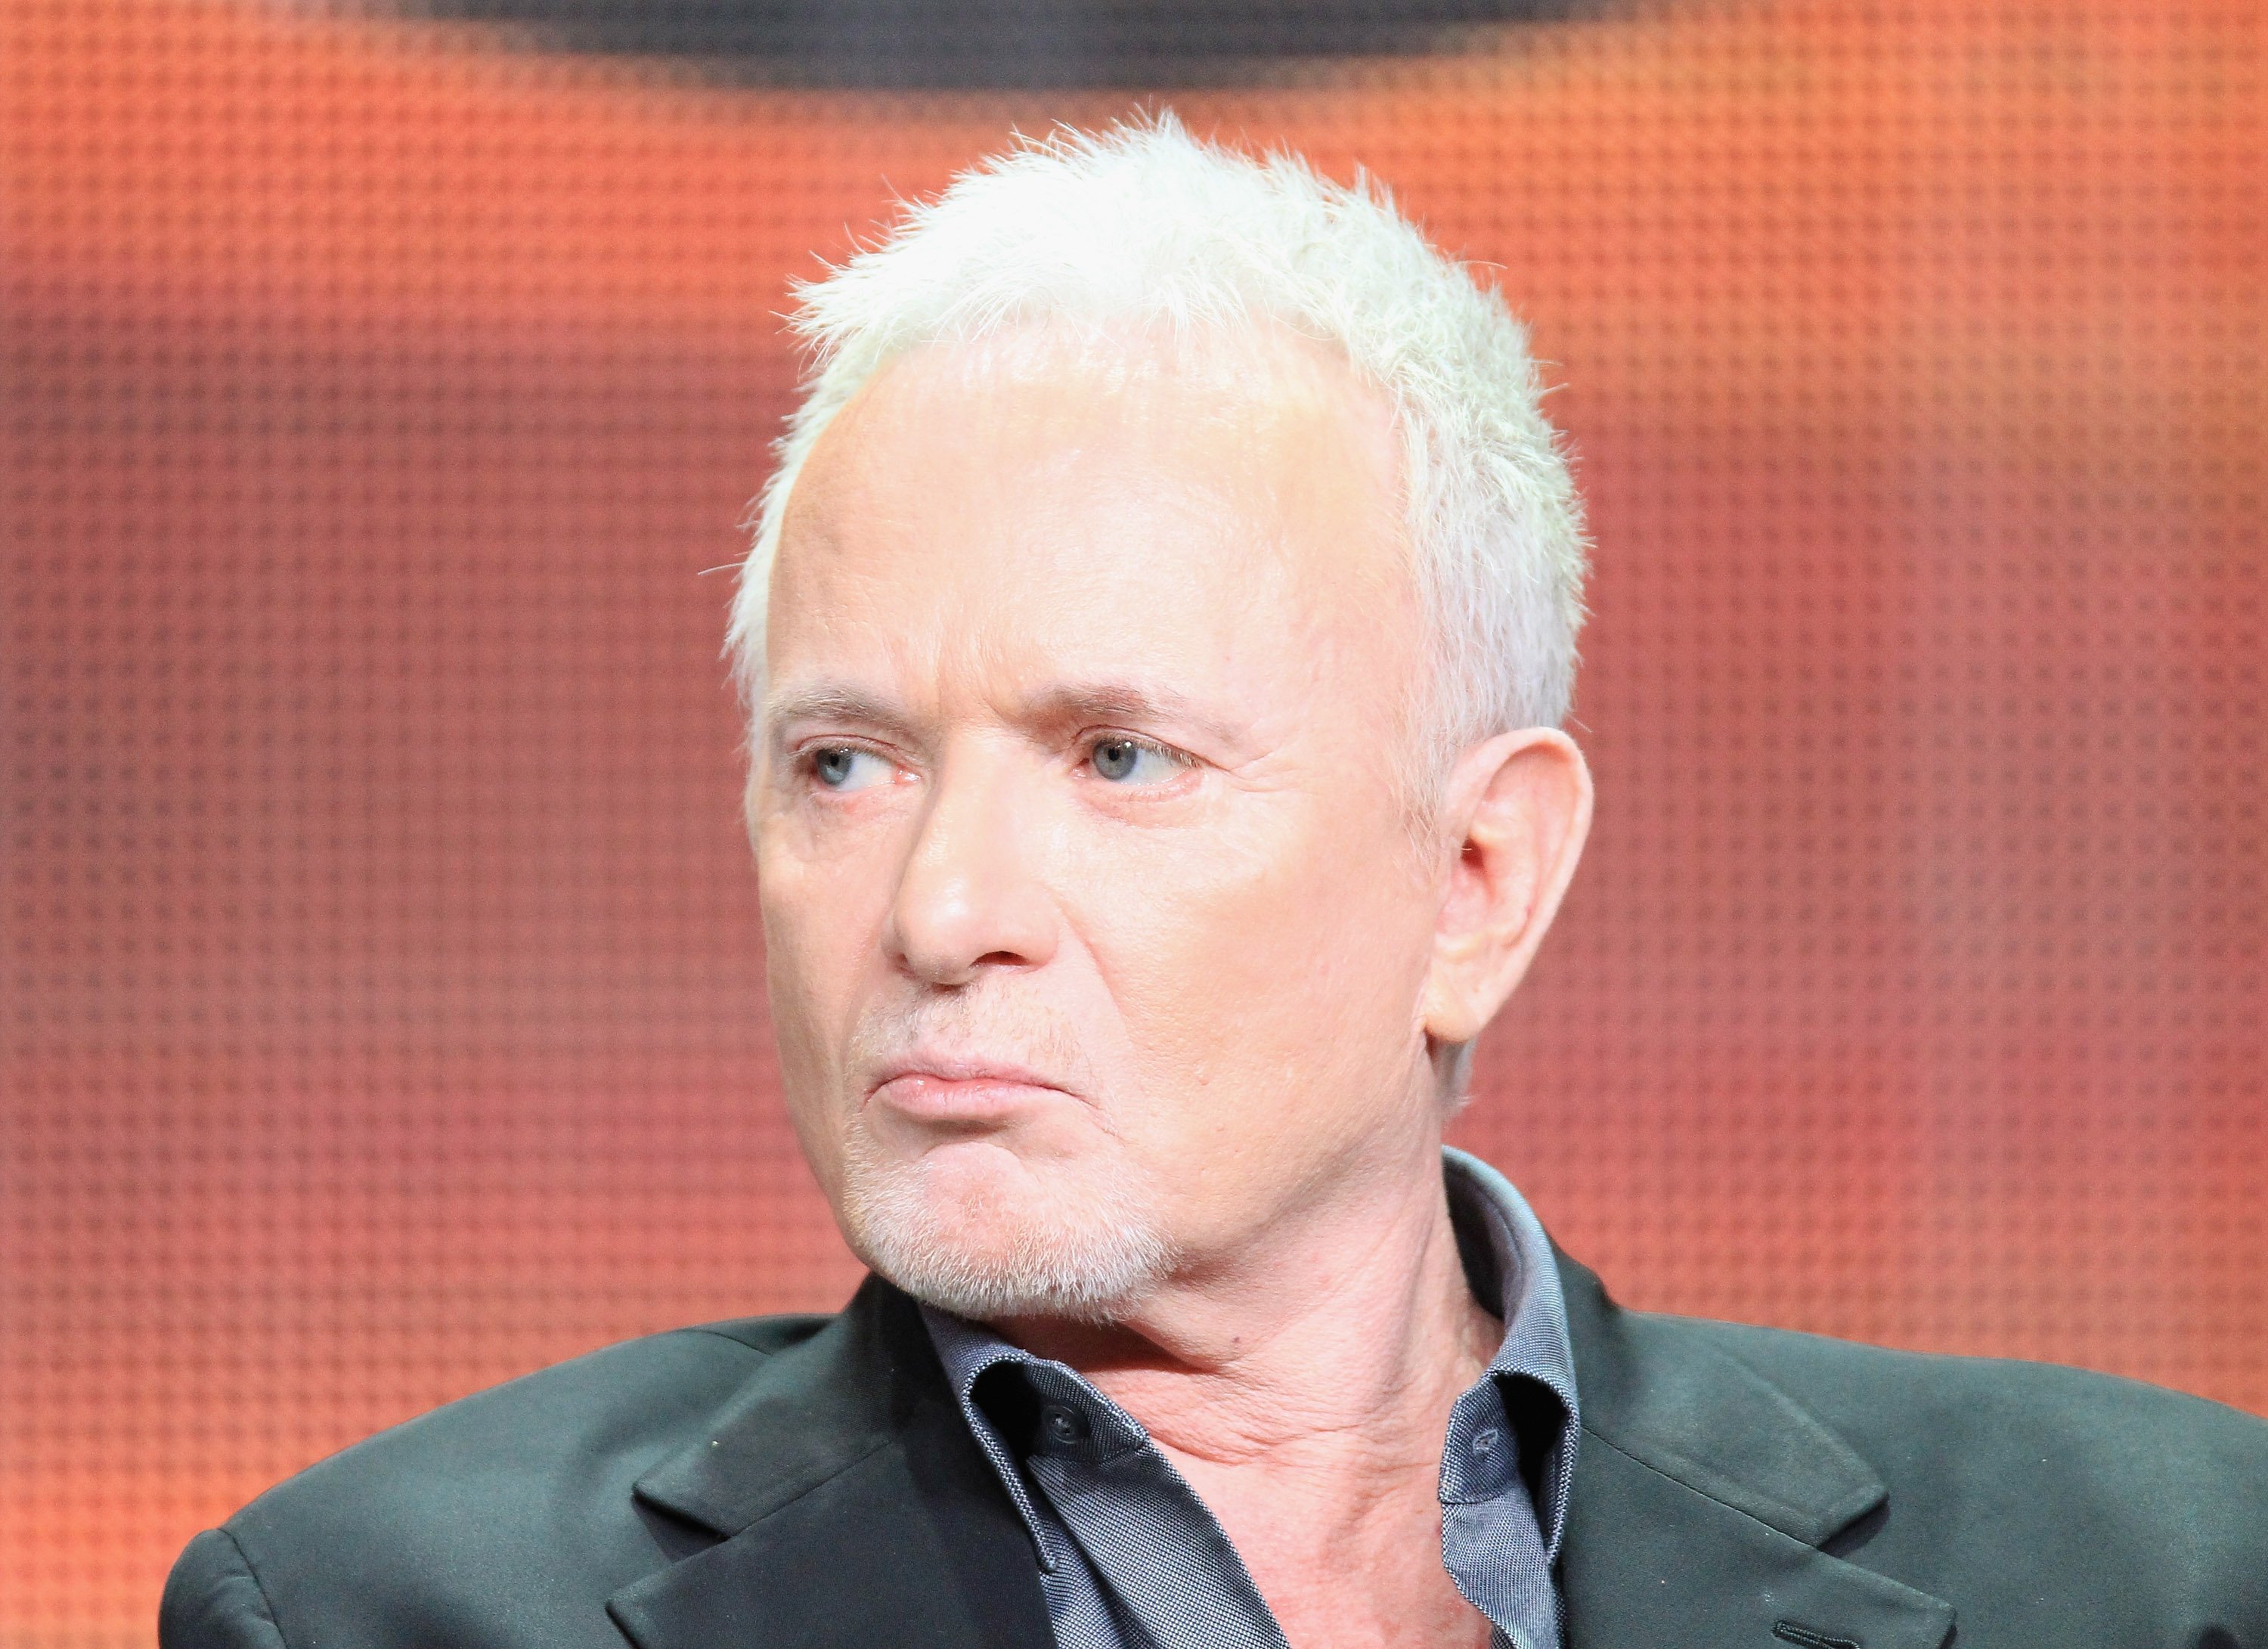 Actor Anthony Geary speaks onstage at the 'General Hospital' panel during day 6 of the Disney ABCTelevision Group portion of the 2012 Summer TCA Tour at The Beverly Hilton Hotel on July 26, 2012 in Beverly Hills, California. | Source: Getty Images